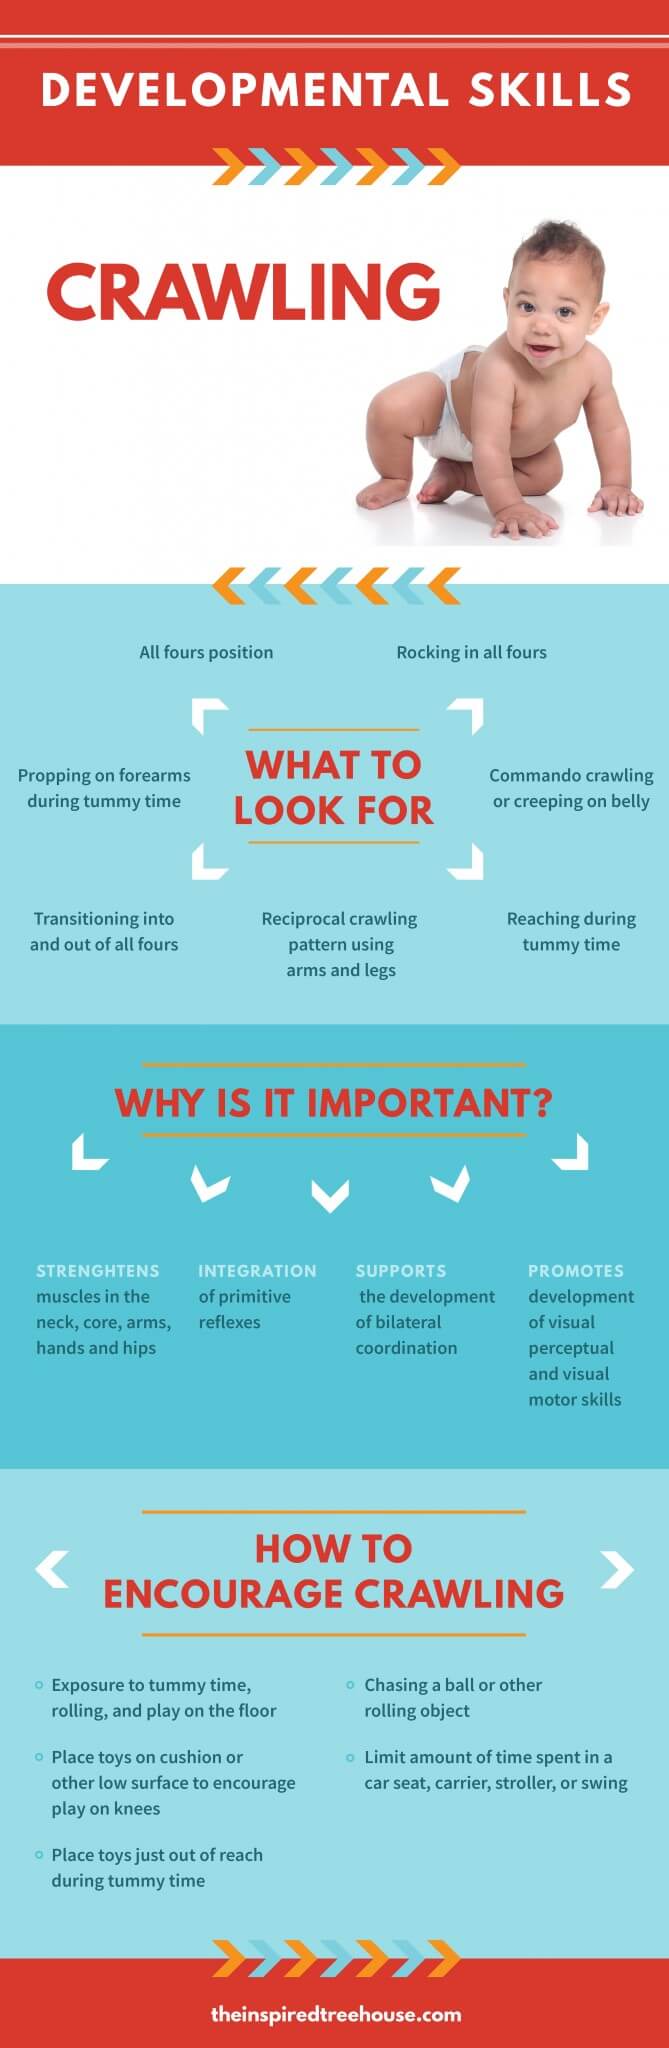 Blue, red and white infographic about the crawling milestone, including what to look for, why crawling is important, and how to encourage crawling.